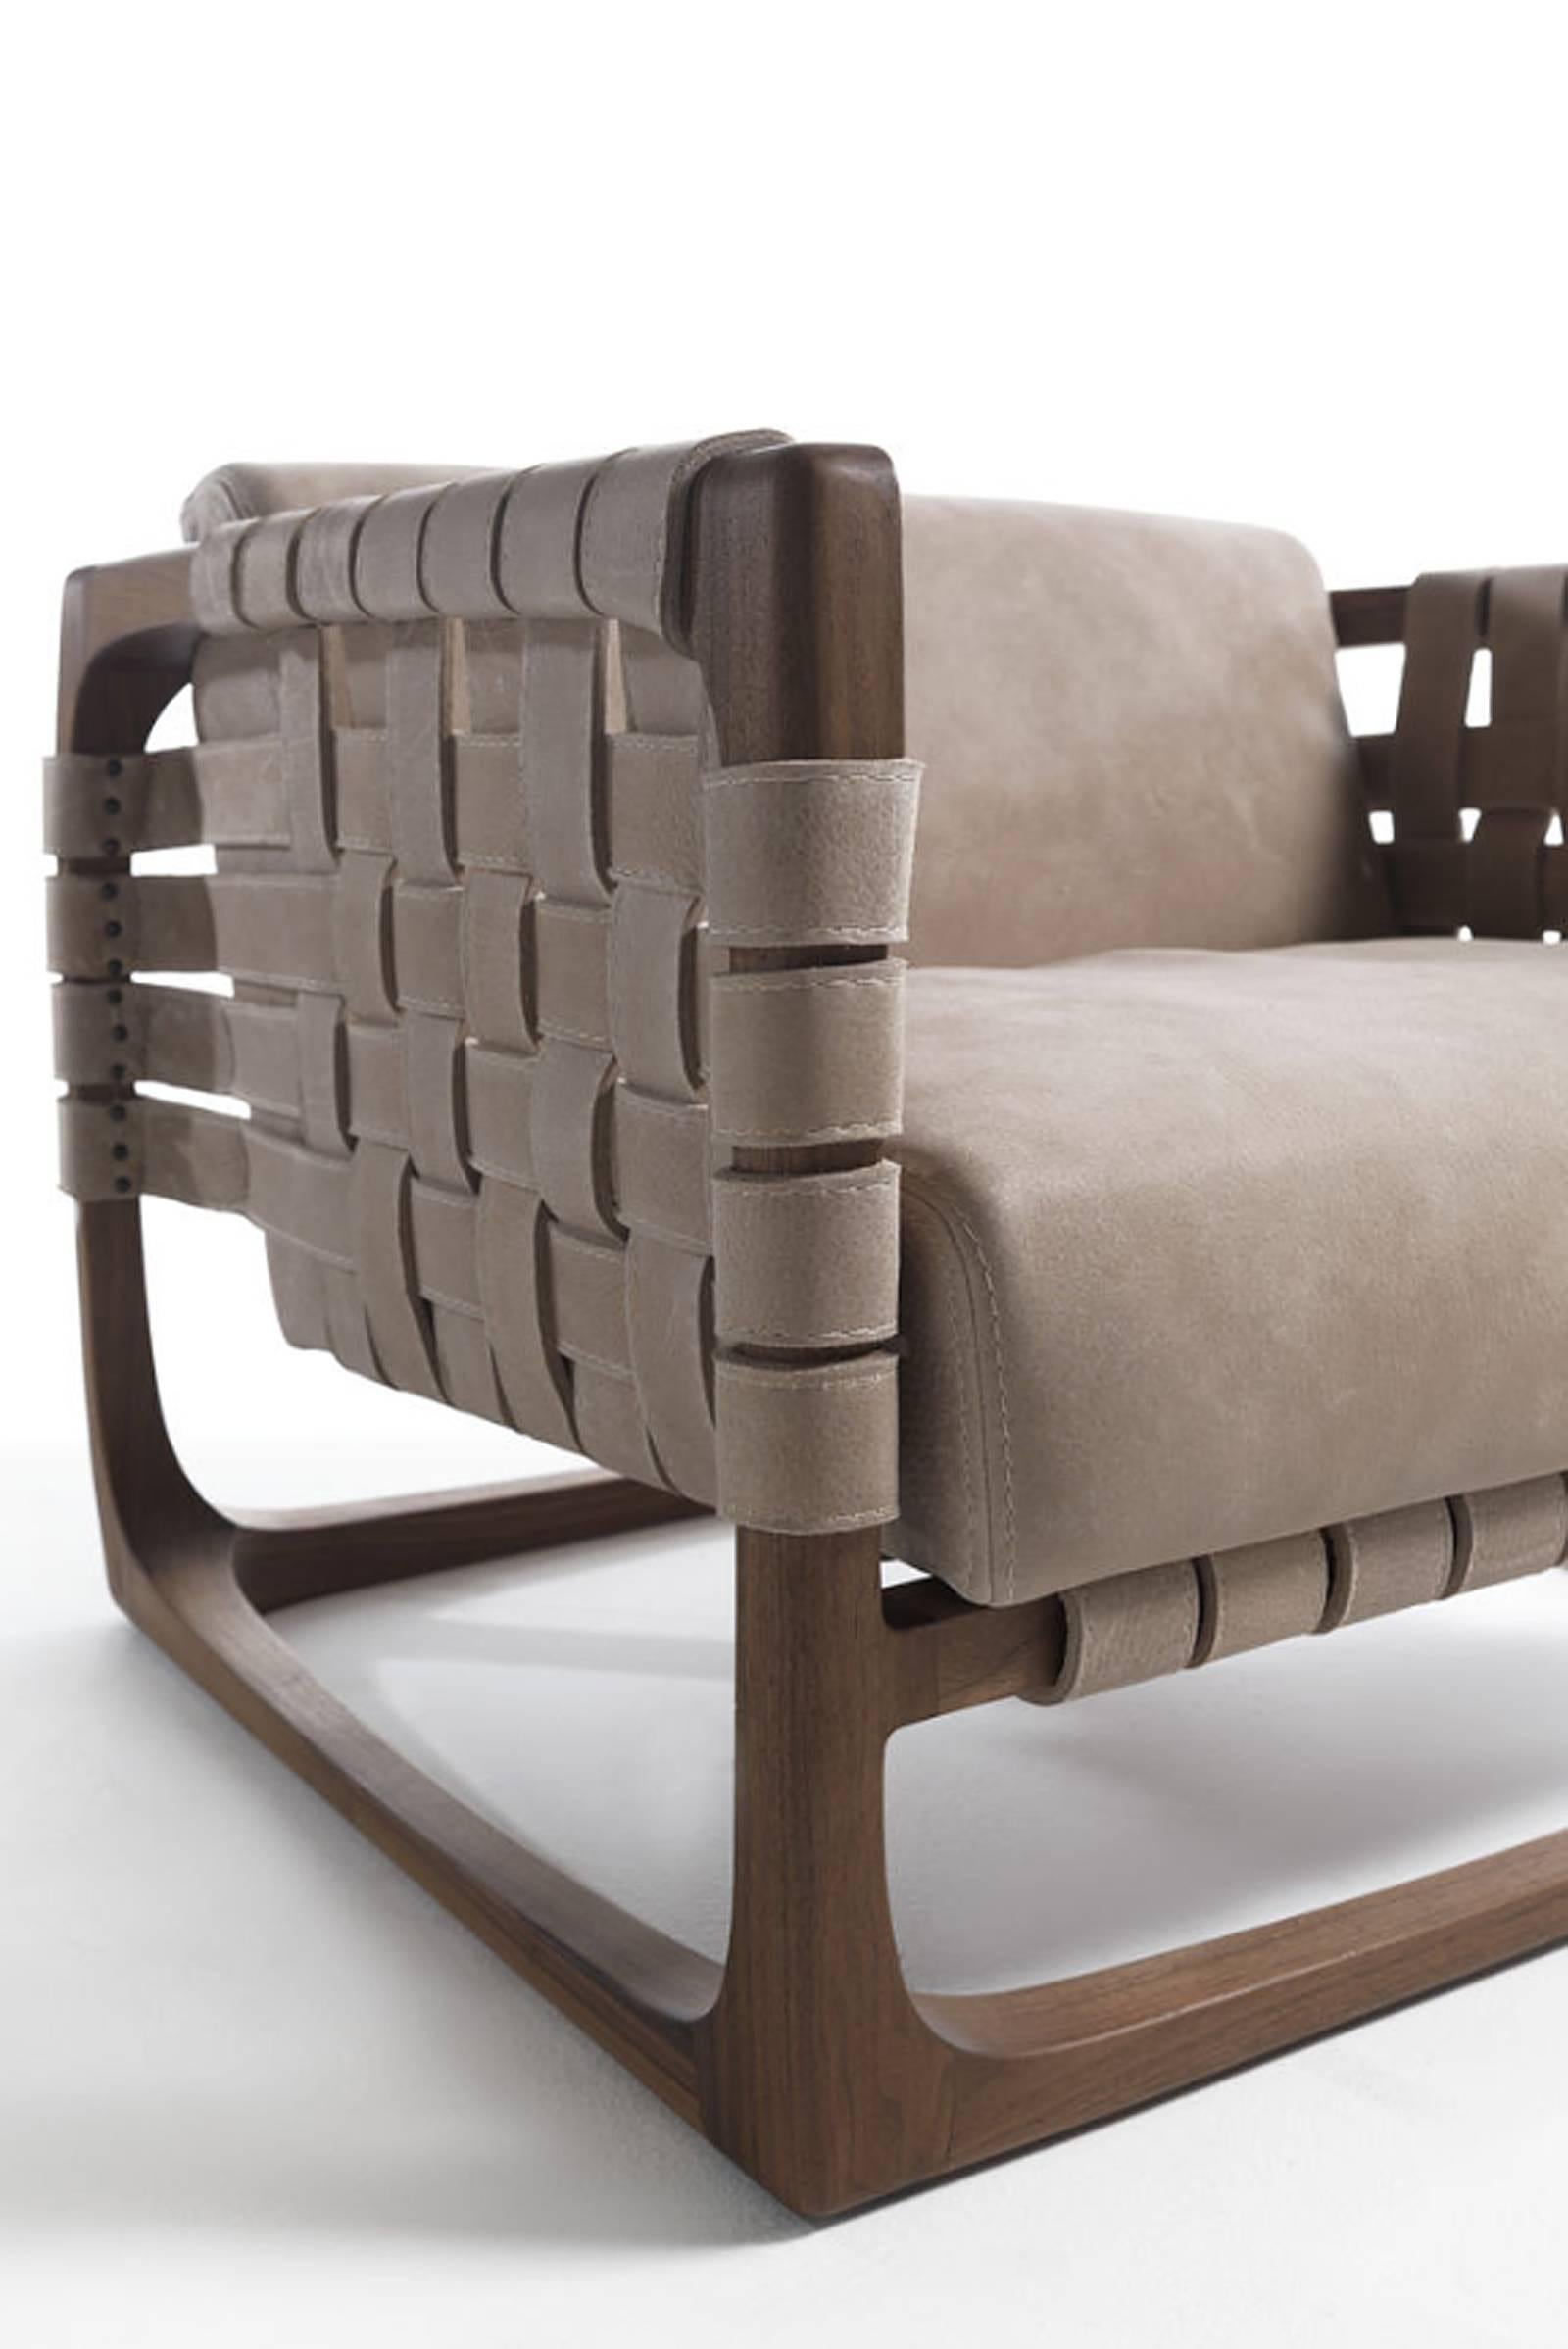 Contemporary Webbing Armchair Padded Seat in Nubuck Leather in solid walnut For Sale